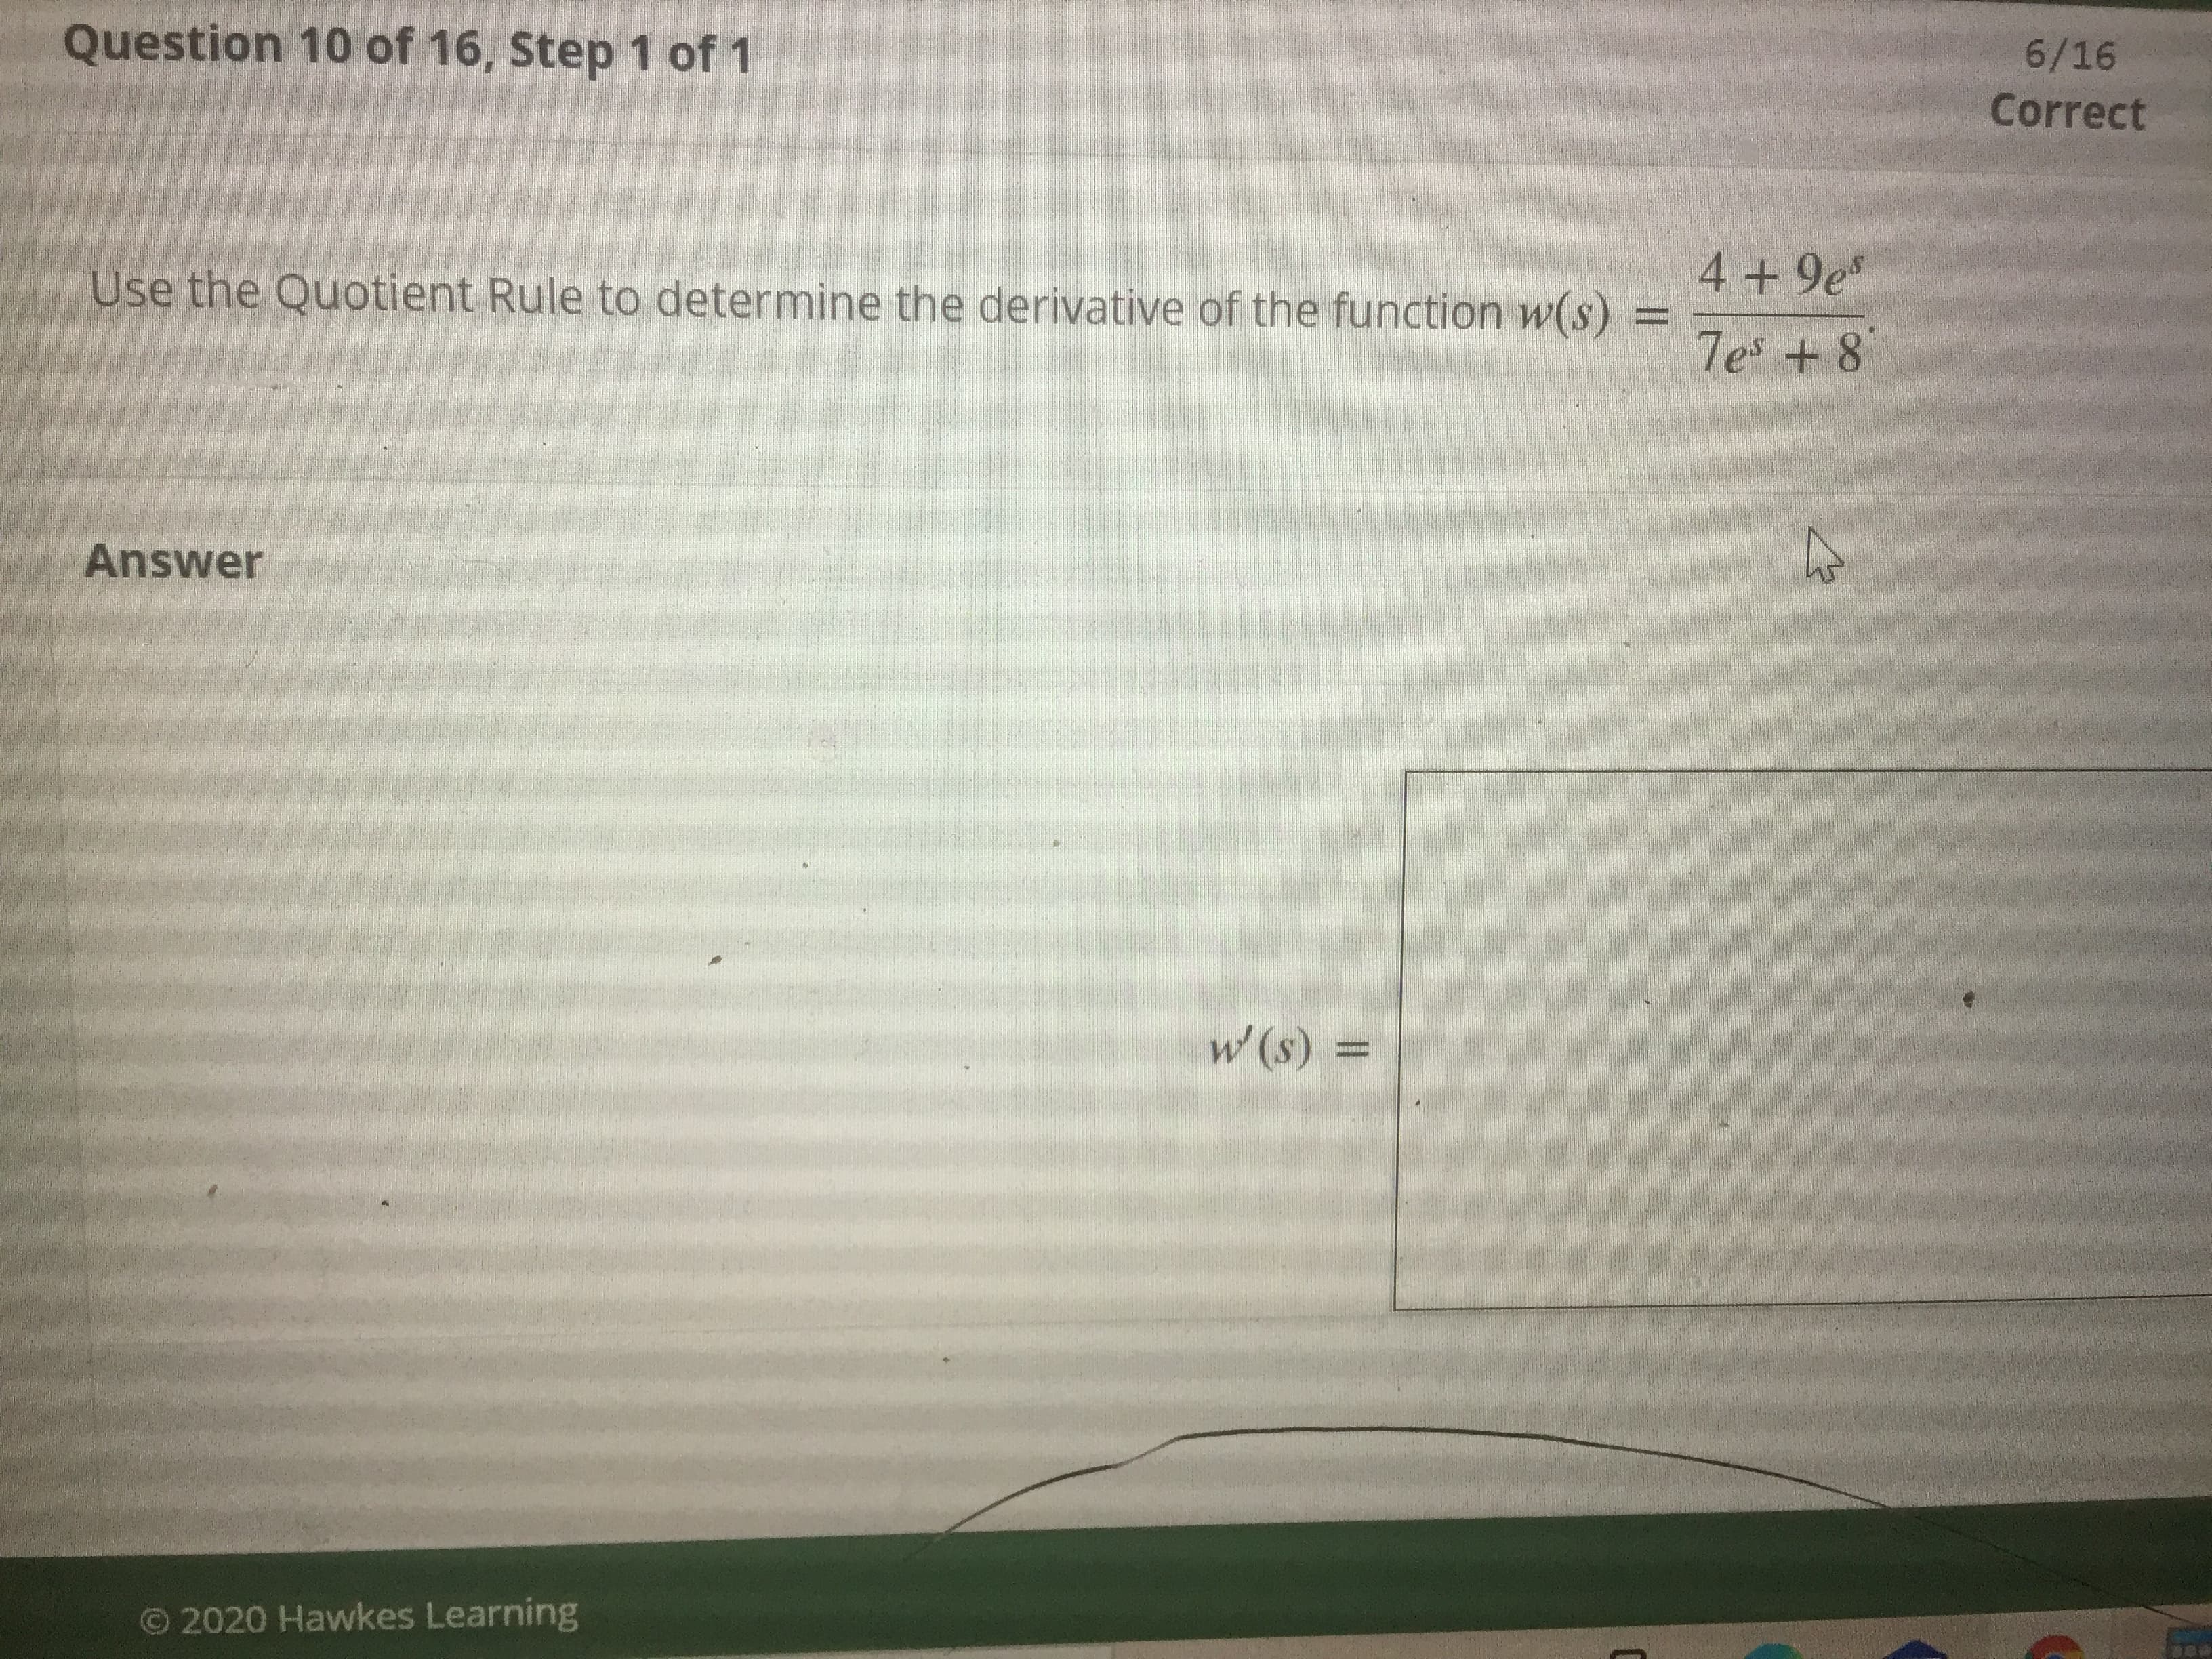 4+ 9e
Use the Quotient Rule to determine the derivative of the function w(s)
7e + 8
